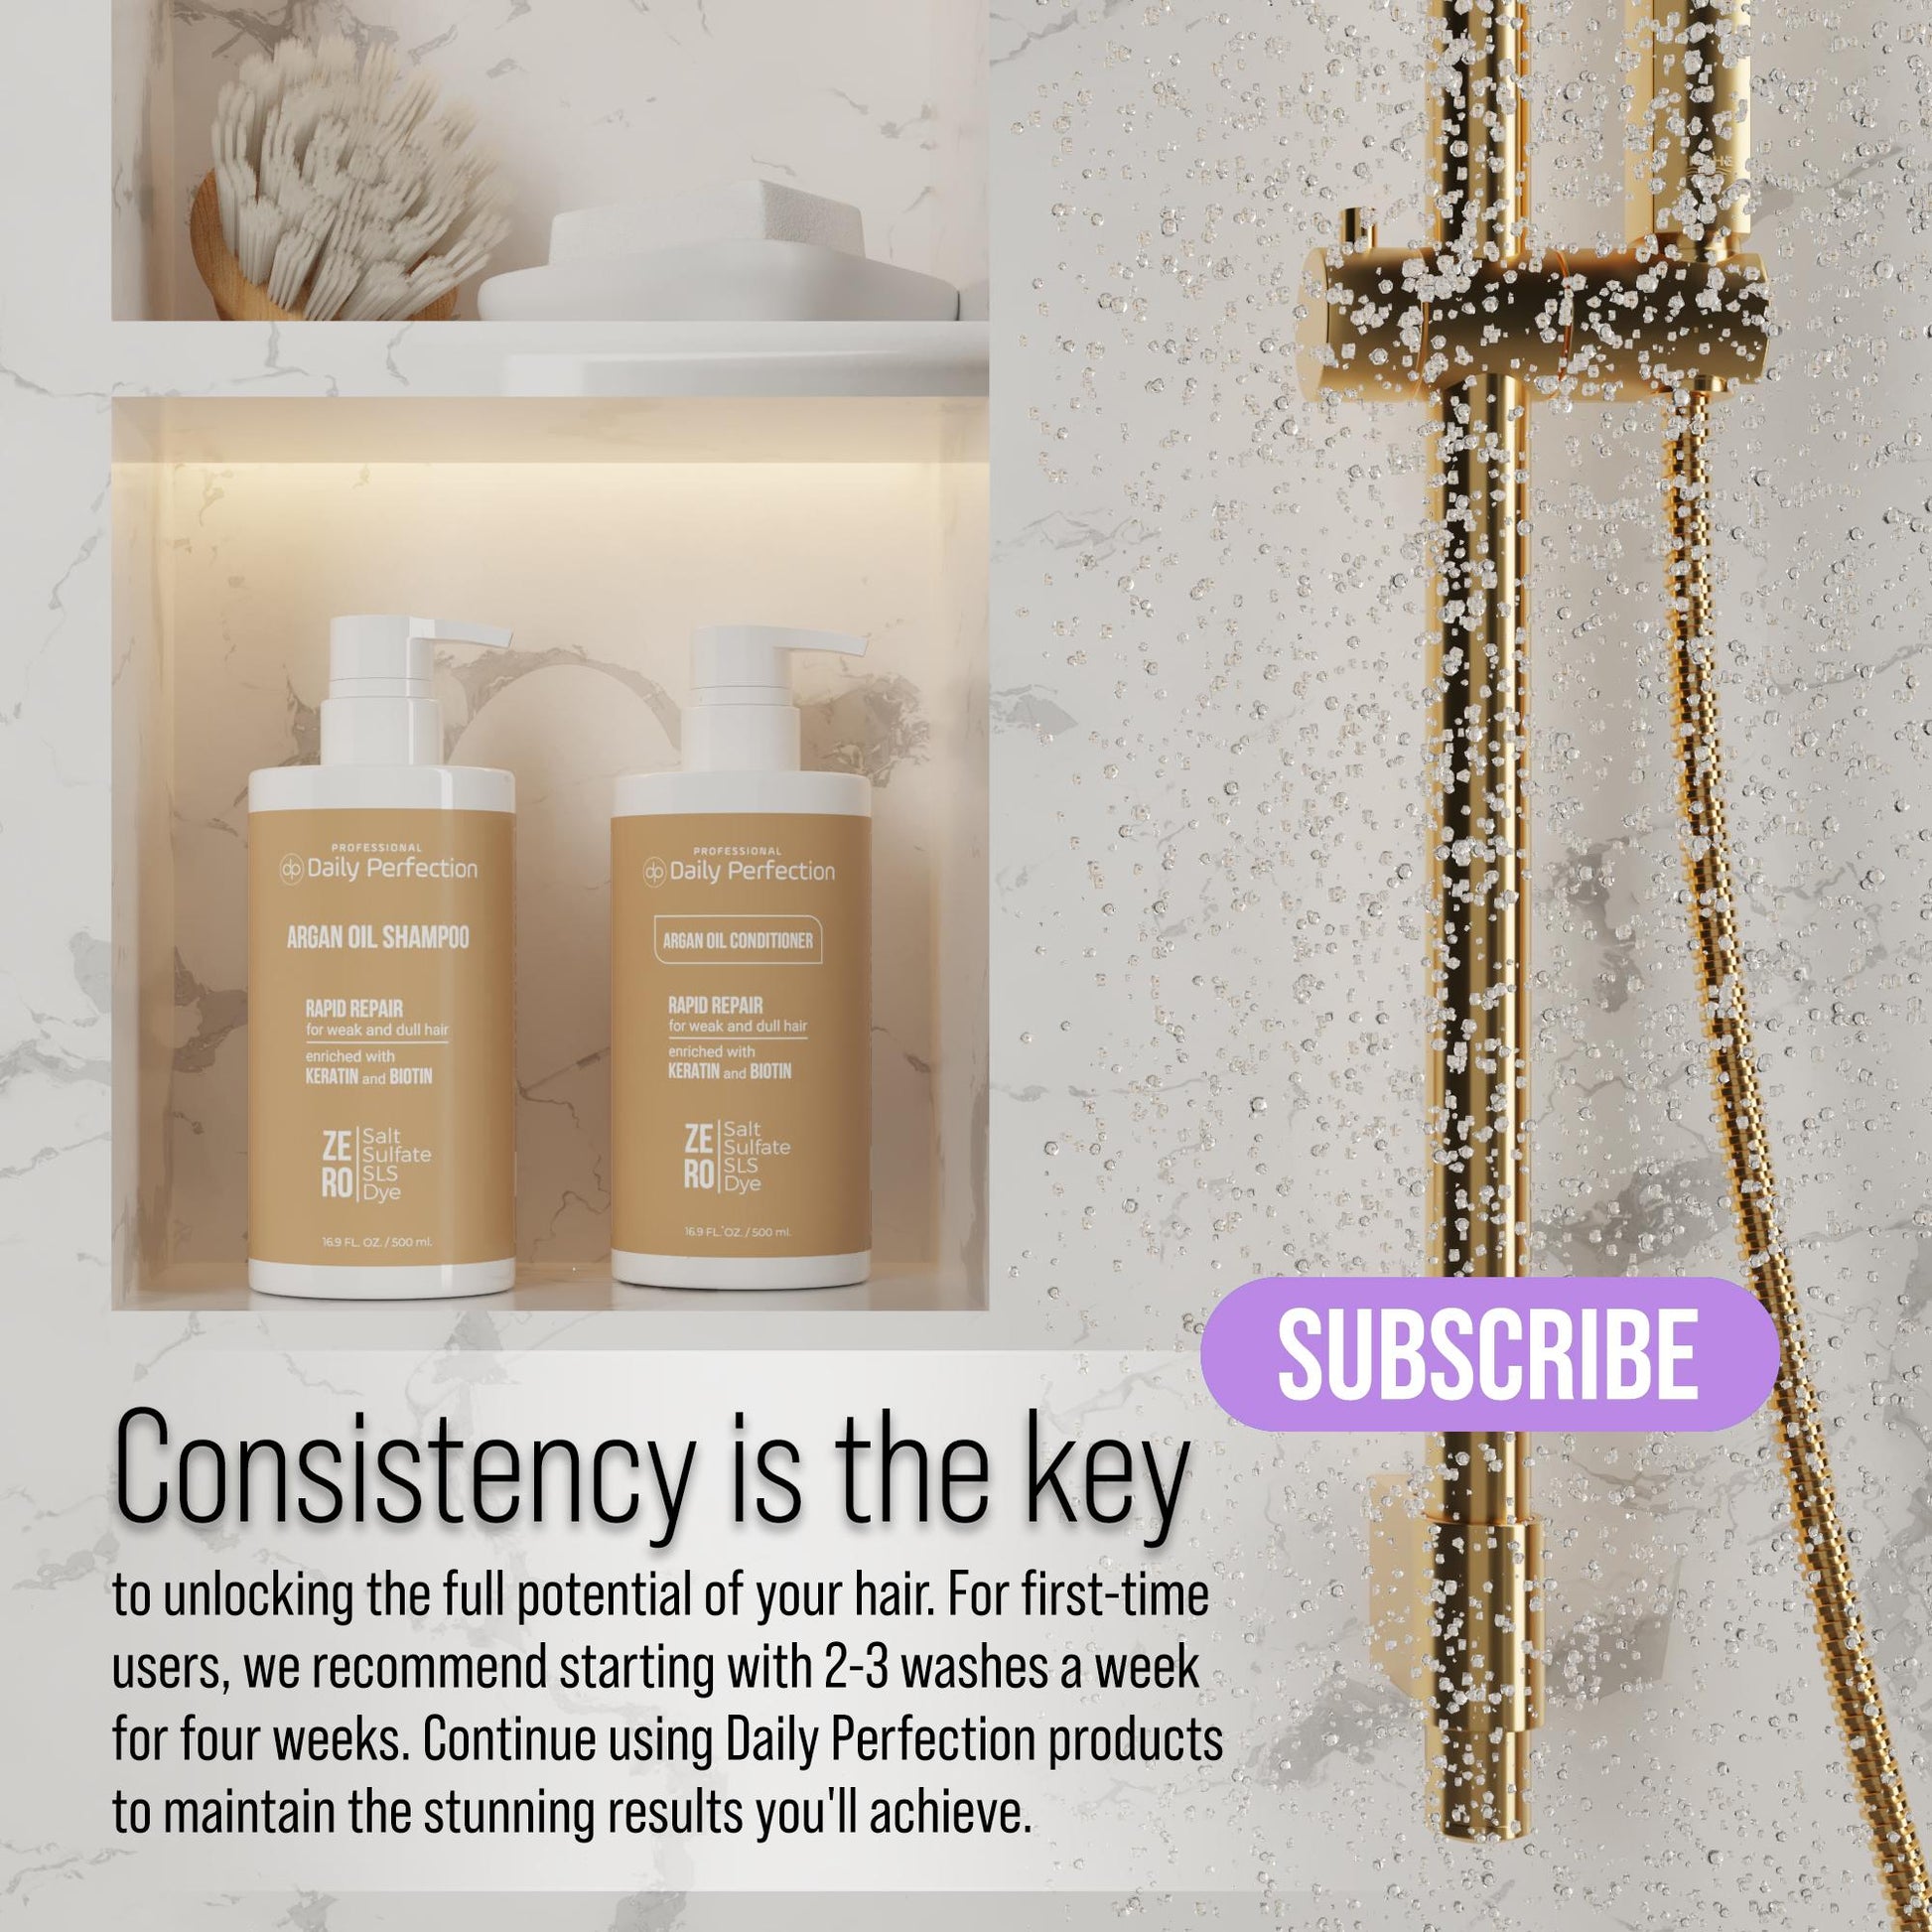 lifestyle image in a shower with a message that explains the importance of consistency in using hair care products along with  the product bottle of Daily Perfection Argan Oil Conditioner